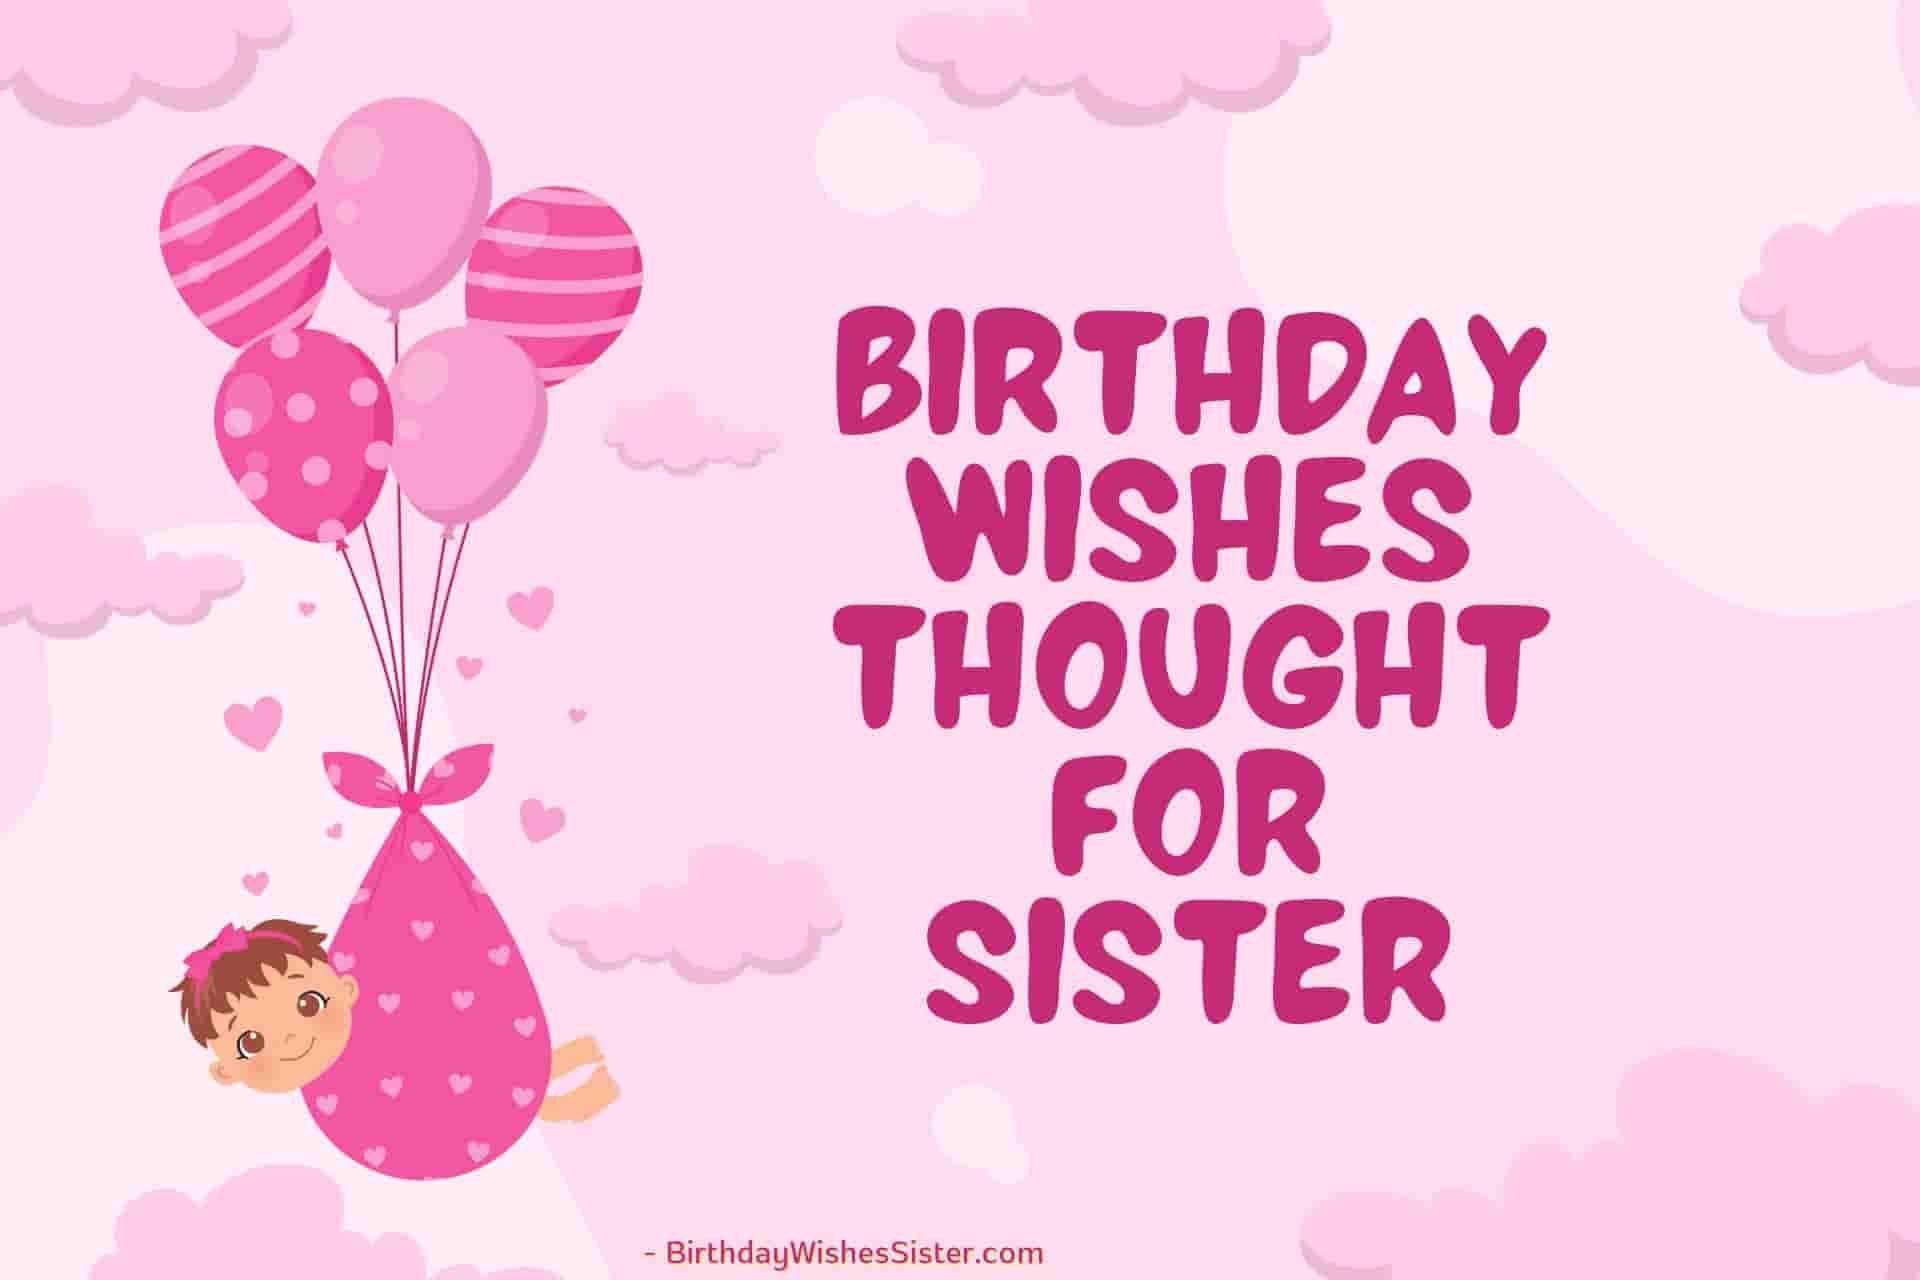 Birthday Wishes Thought For Sister